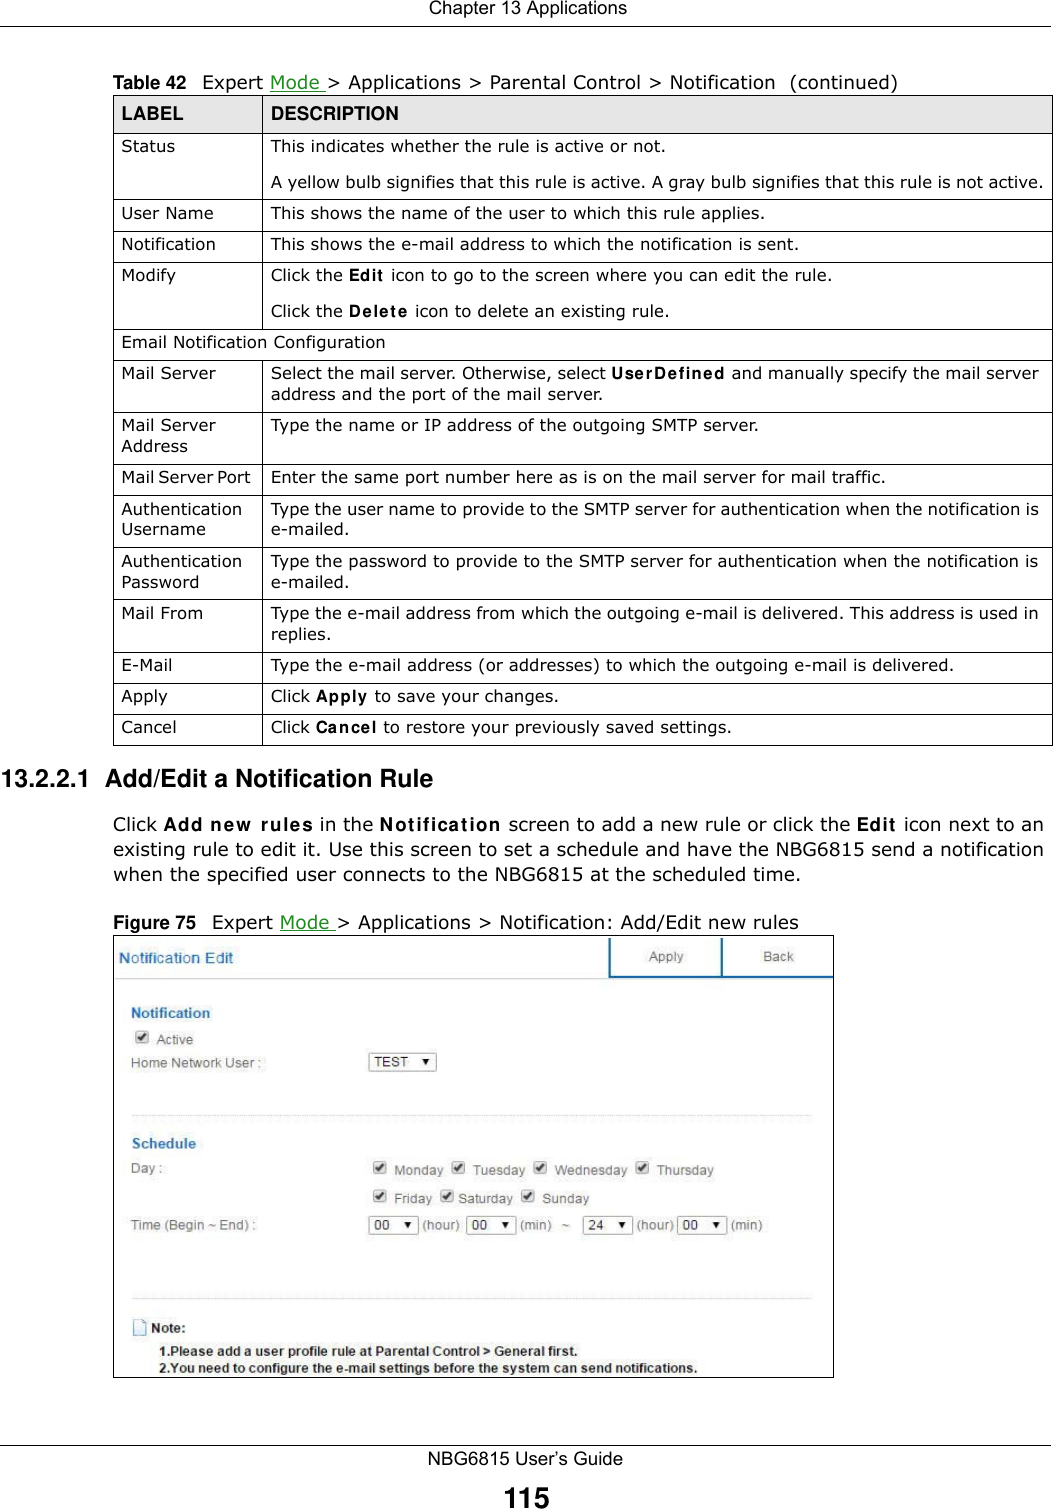  Chapter 13 ApplicationsNBG6815 User’s Guide11513.2.2.1  Add/Edit a Notification RuleClick Add new rules in the Notification screen to add a new rule or click the Edit icon next to an existing rule to edit it. Use this screen to set a schedule and have the NBG6815 send a notification when the specified user connects to the NBG6815 at the scheduled time.Figure 75   Expert Mode &gt; Applications &gt; Notification: Add/Edit new rules Status This indicates whether the rule is active or not.A yellow bulb signifies that this rule is active. A gray bulb signifies that this rule is not active.User Name This shows the name of the user to which this rule applies.Notification This shows the e-mail address to which the notification is sent.Modify Click the Edit icon to go to the screen where you can edit the rule.Click the Delete icon to delete an existing rule.Email Notification ConfigurationMail Server Select the mail server. Otherwise, select UserDefined and manually specify the mail server address and the port of the mail server.Mail Server AddressType the name or IP address of the outgoing SMTP server.Mail Server Port  Enter the same port number here as is on the mail server for mail traffic.Authentication UsernameType the user name to provide to the SMTP server for authentication when the notification is e-mailed.Authentication PasswordType the password to provide to the SMTP server for authentication when the notification is e-mailed.Mail From Type the e-mail address from which the outgoing e-mail is delivered. This address is used in replies.E-Mail Type the e-mail address (or addresses) to which the outgoing e-mail is delivered.Apply Click Apply to save your changes.Cancel Click Cancel to restore your previously saved settings.Table 42   Expert Mode &gt; Applications &gt; Parental Control &gt; Notification  (continued)LABEL DESCRIPTION